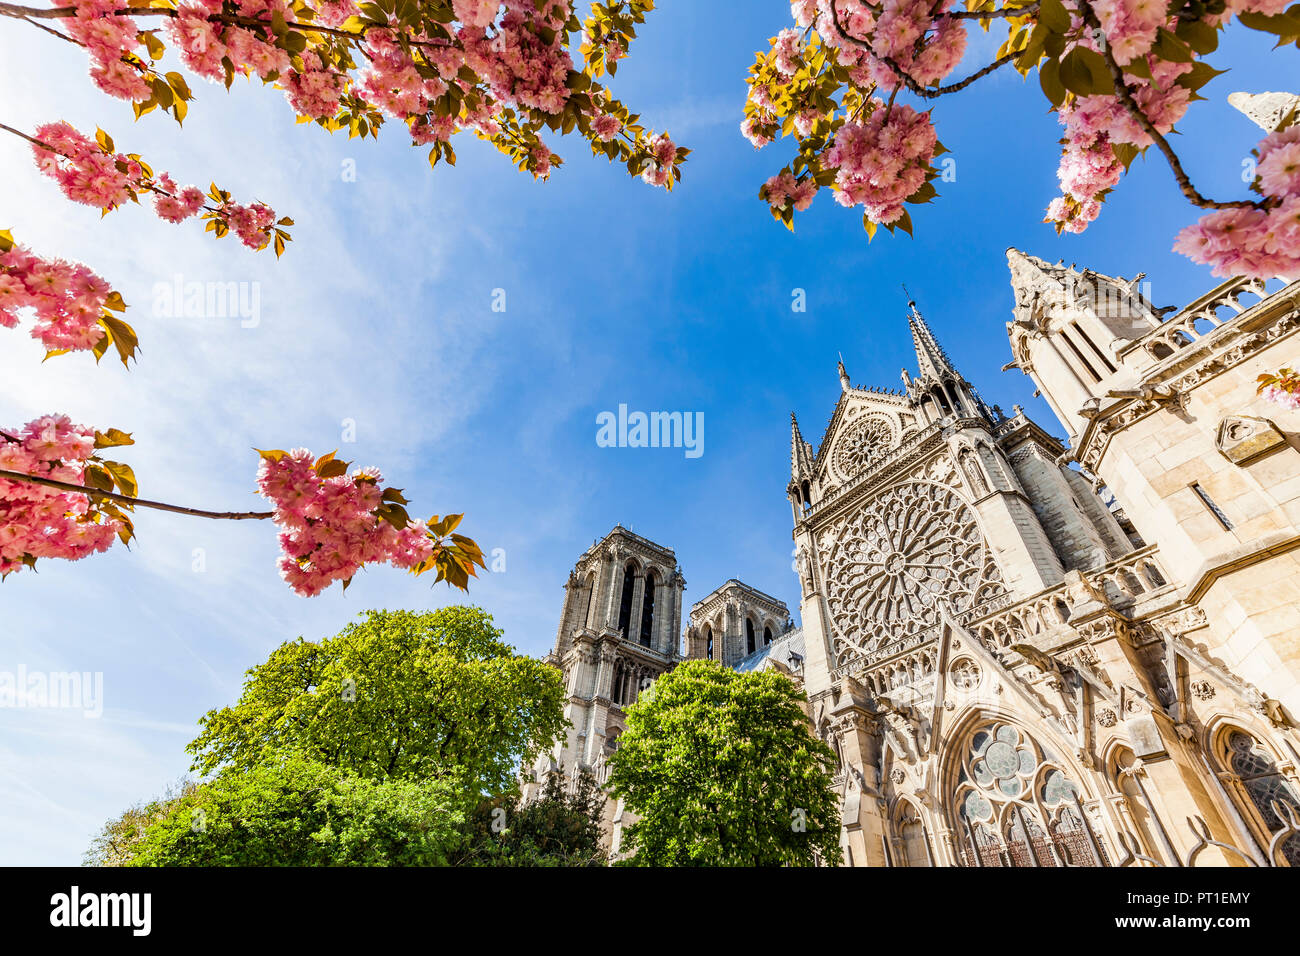 France, Paris, Notre Dame church in spring Stock Photo